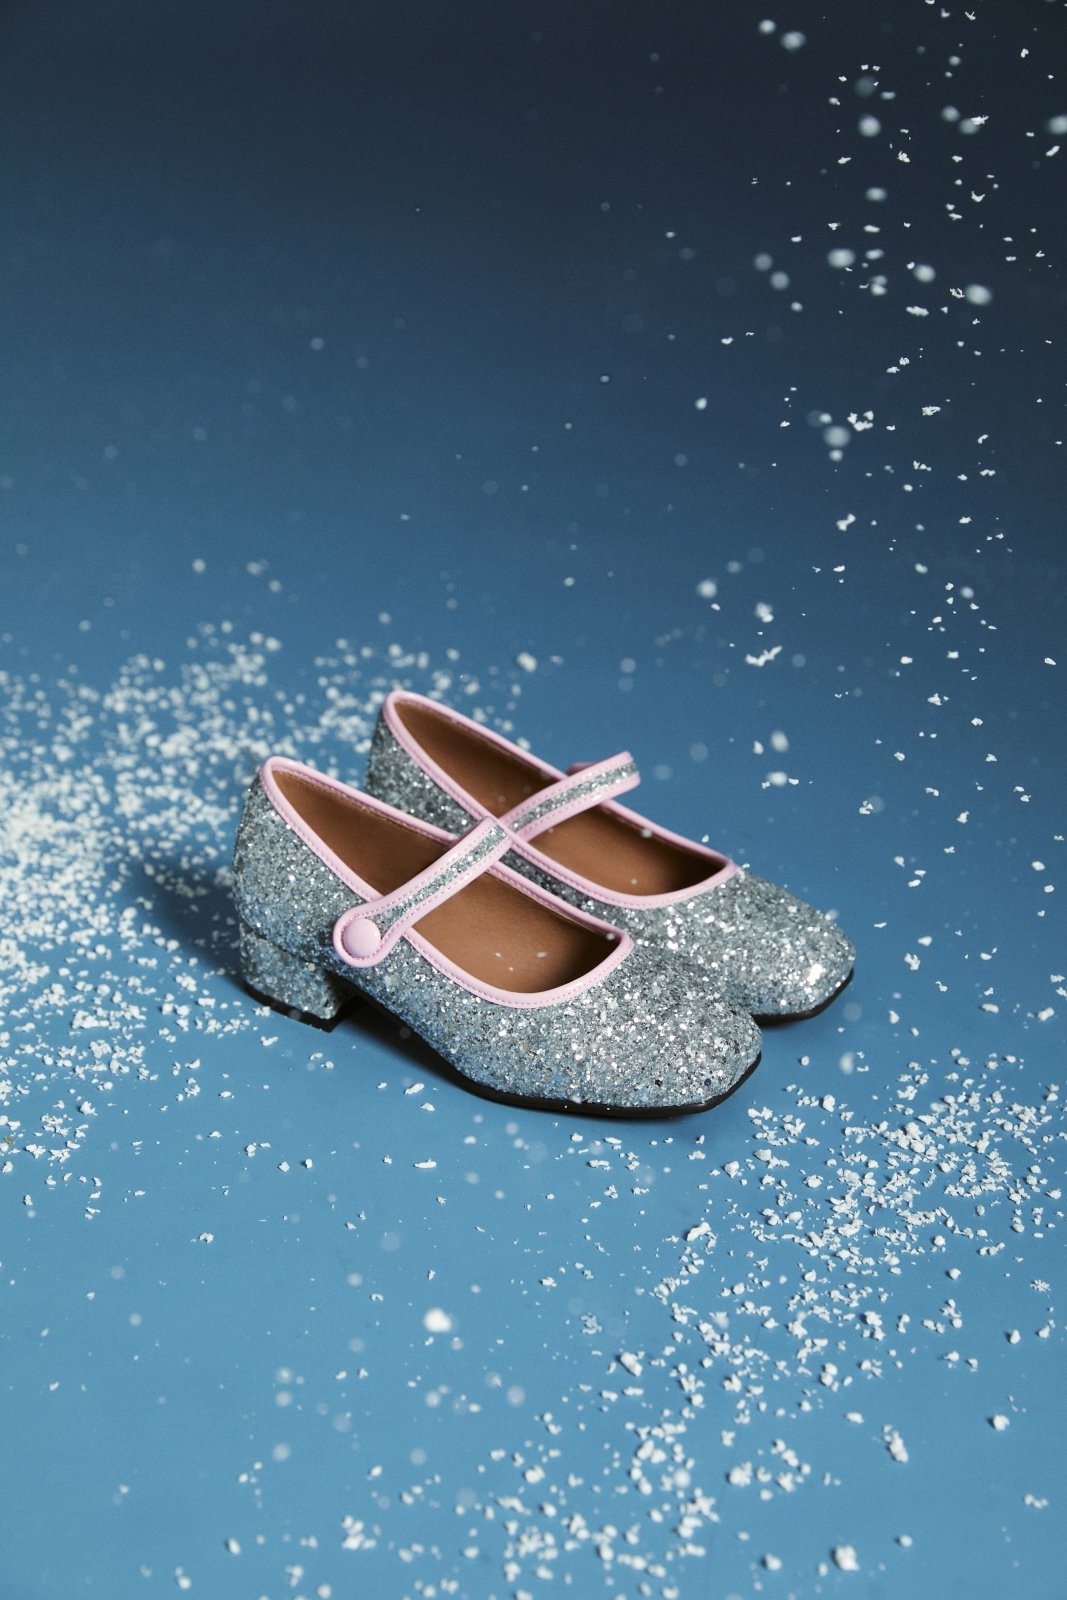 Agnese 2.0 Silver/Pink Shoes by Age of Innocence